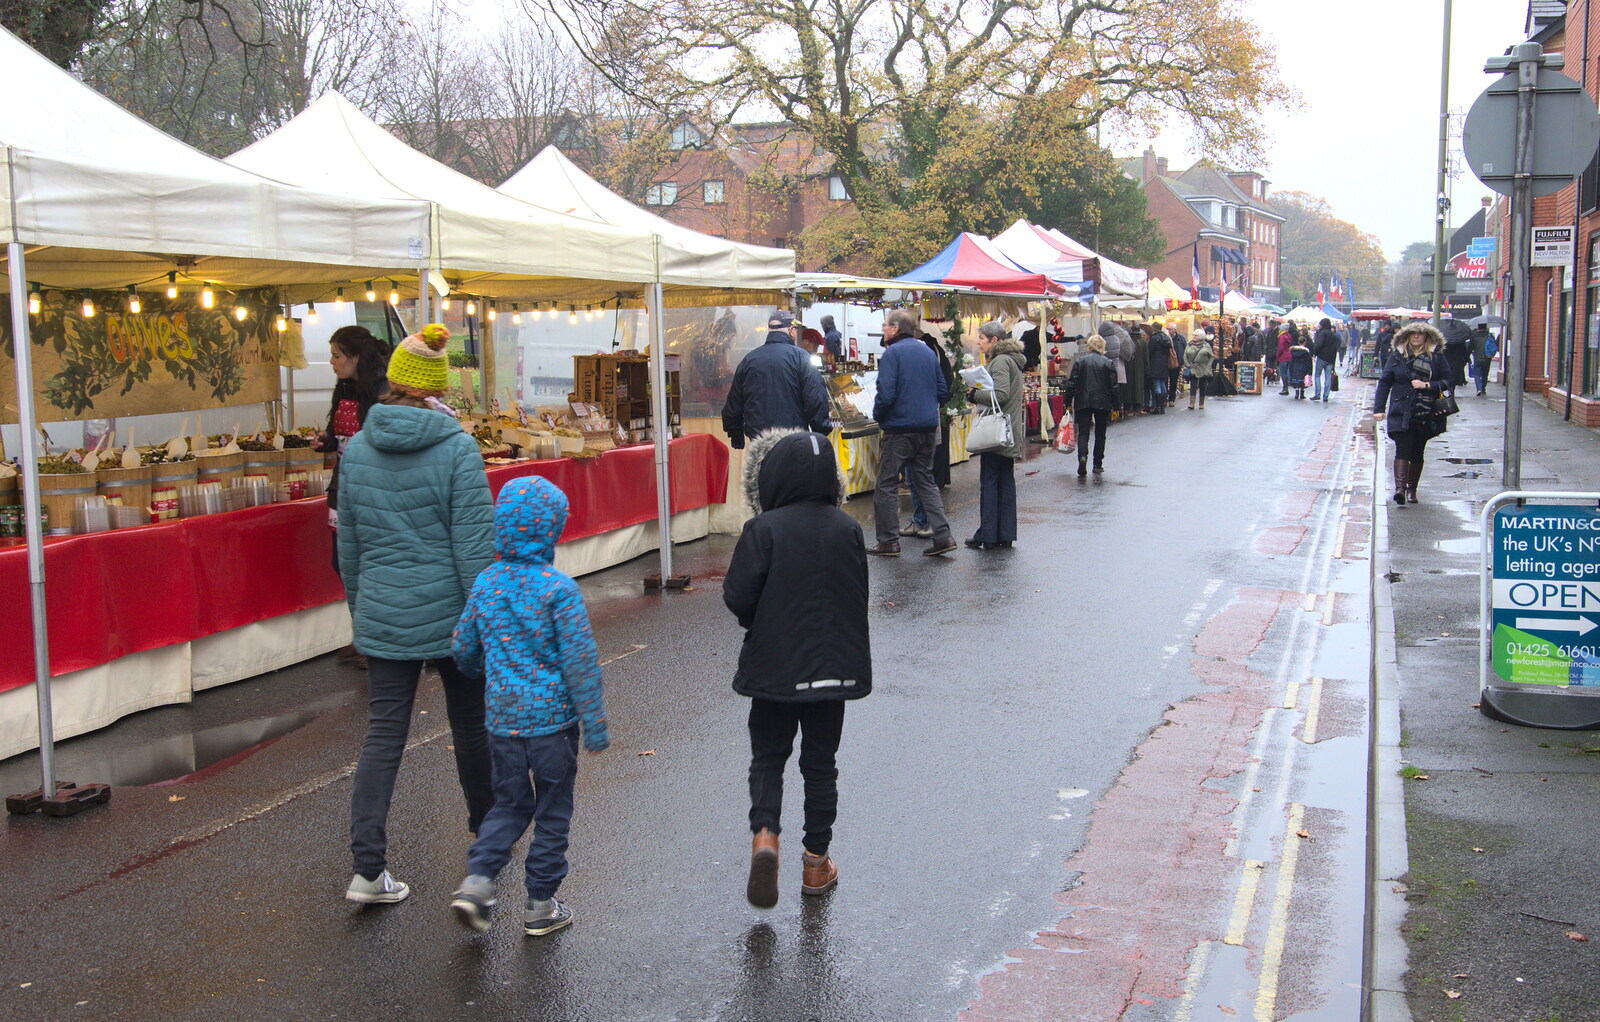 There's a French market on Ashley Road from A Christmas Market, New Milton, Hampshire - 24th November 2018